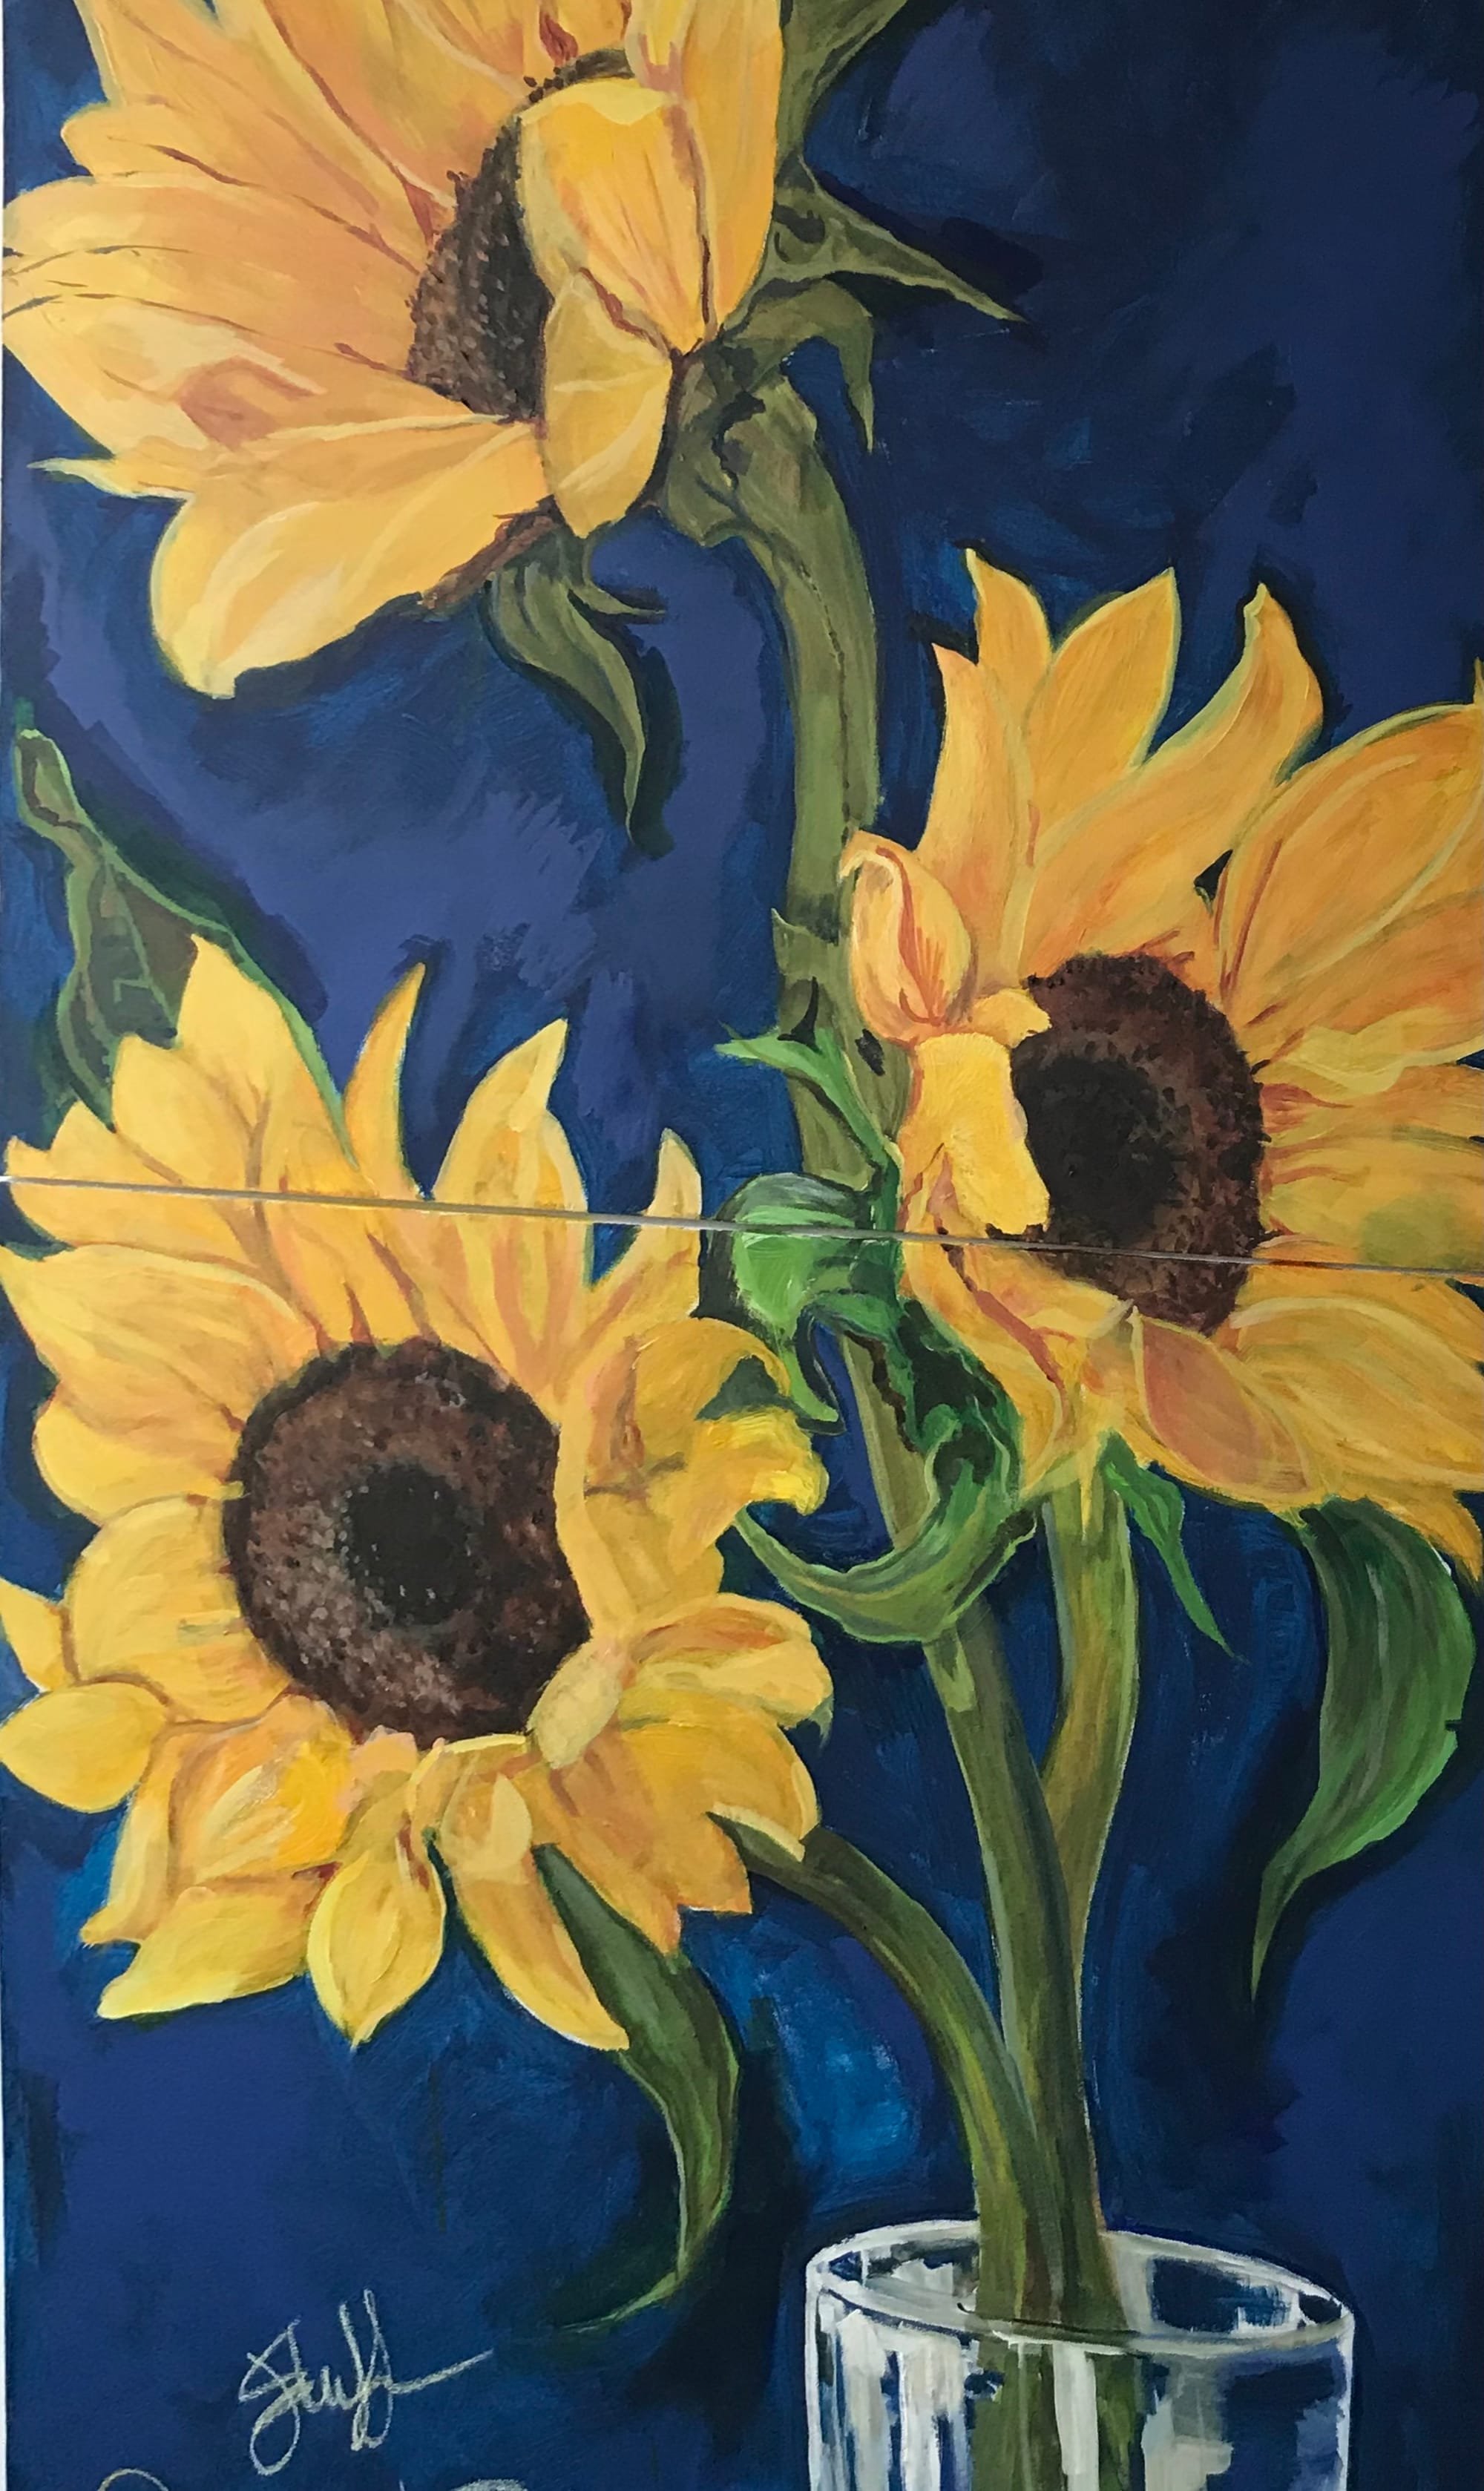 A collaboration of sunflowers